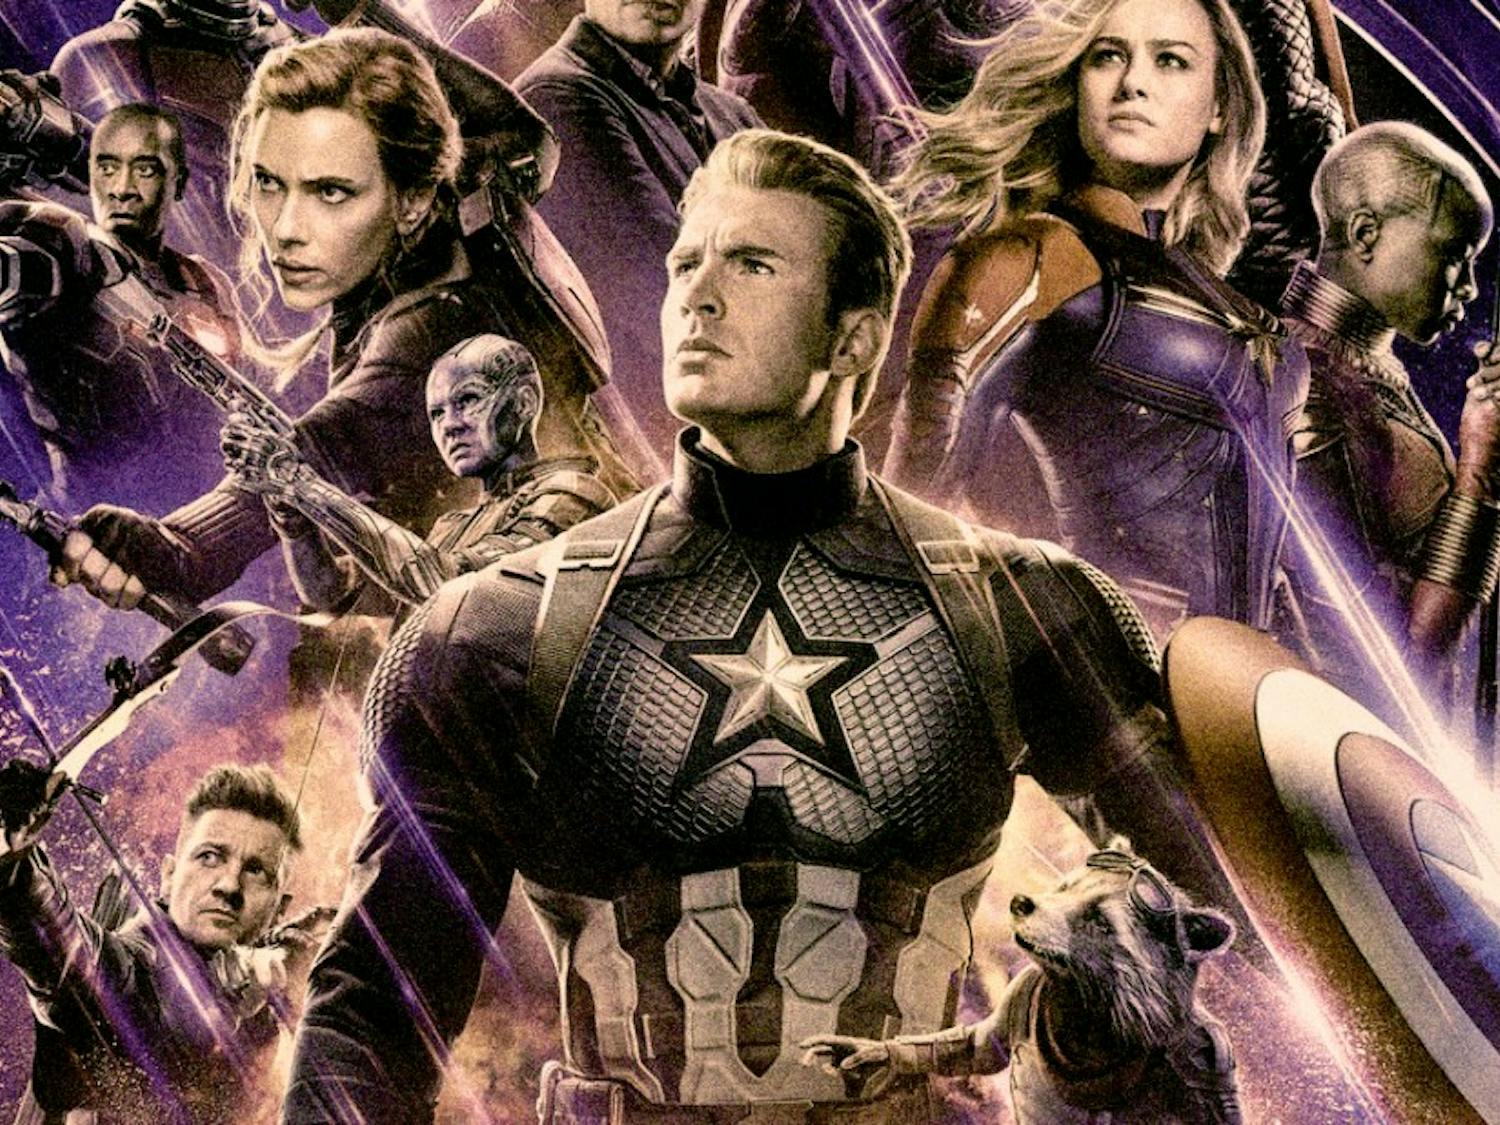 The blockbuster hit “Avengers: Endgame” brought many iconic Marvel superheroes’ storylines to an end.